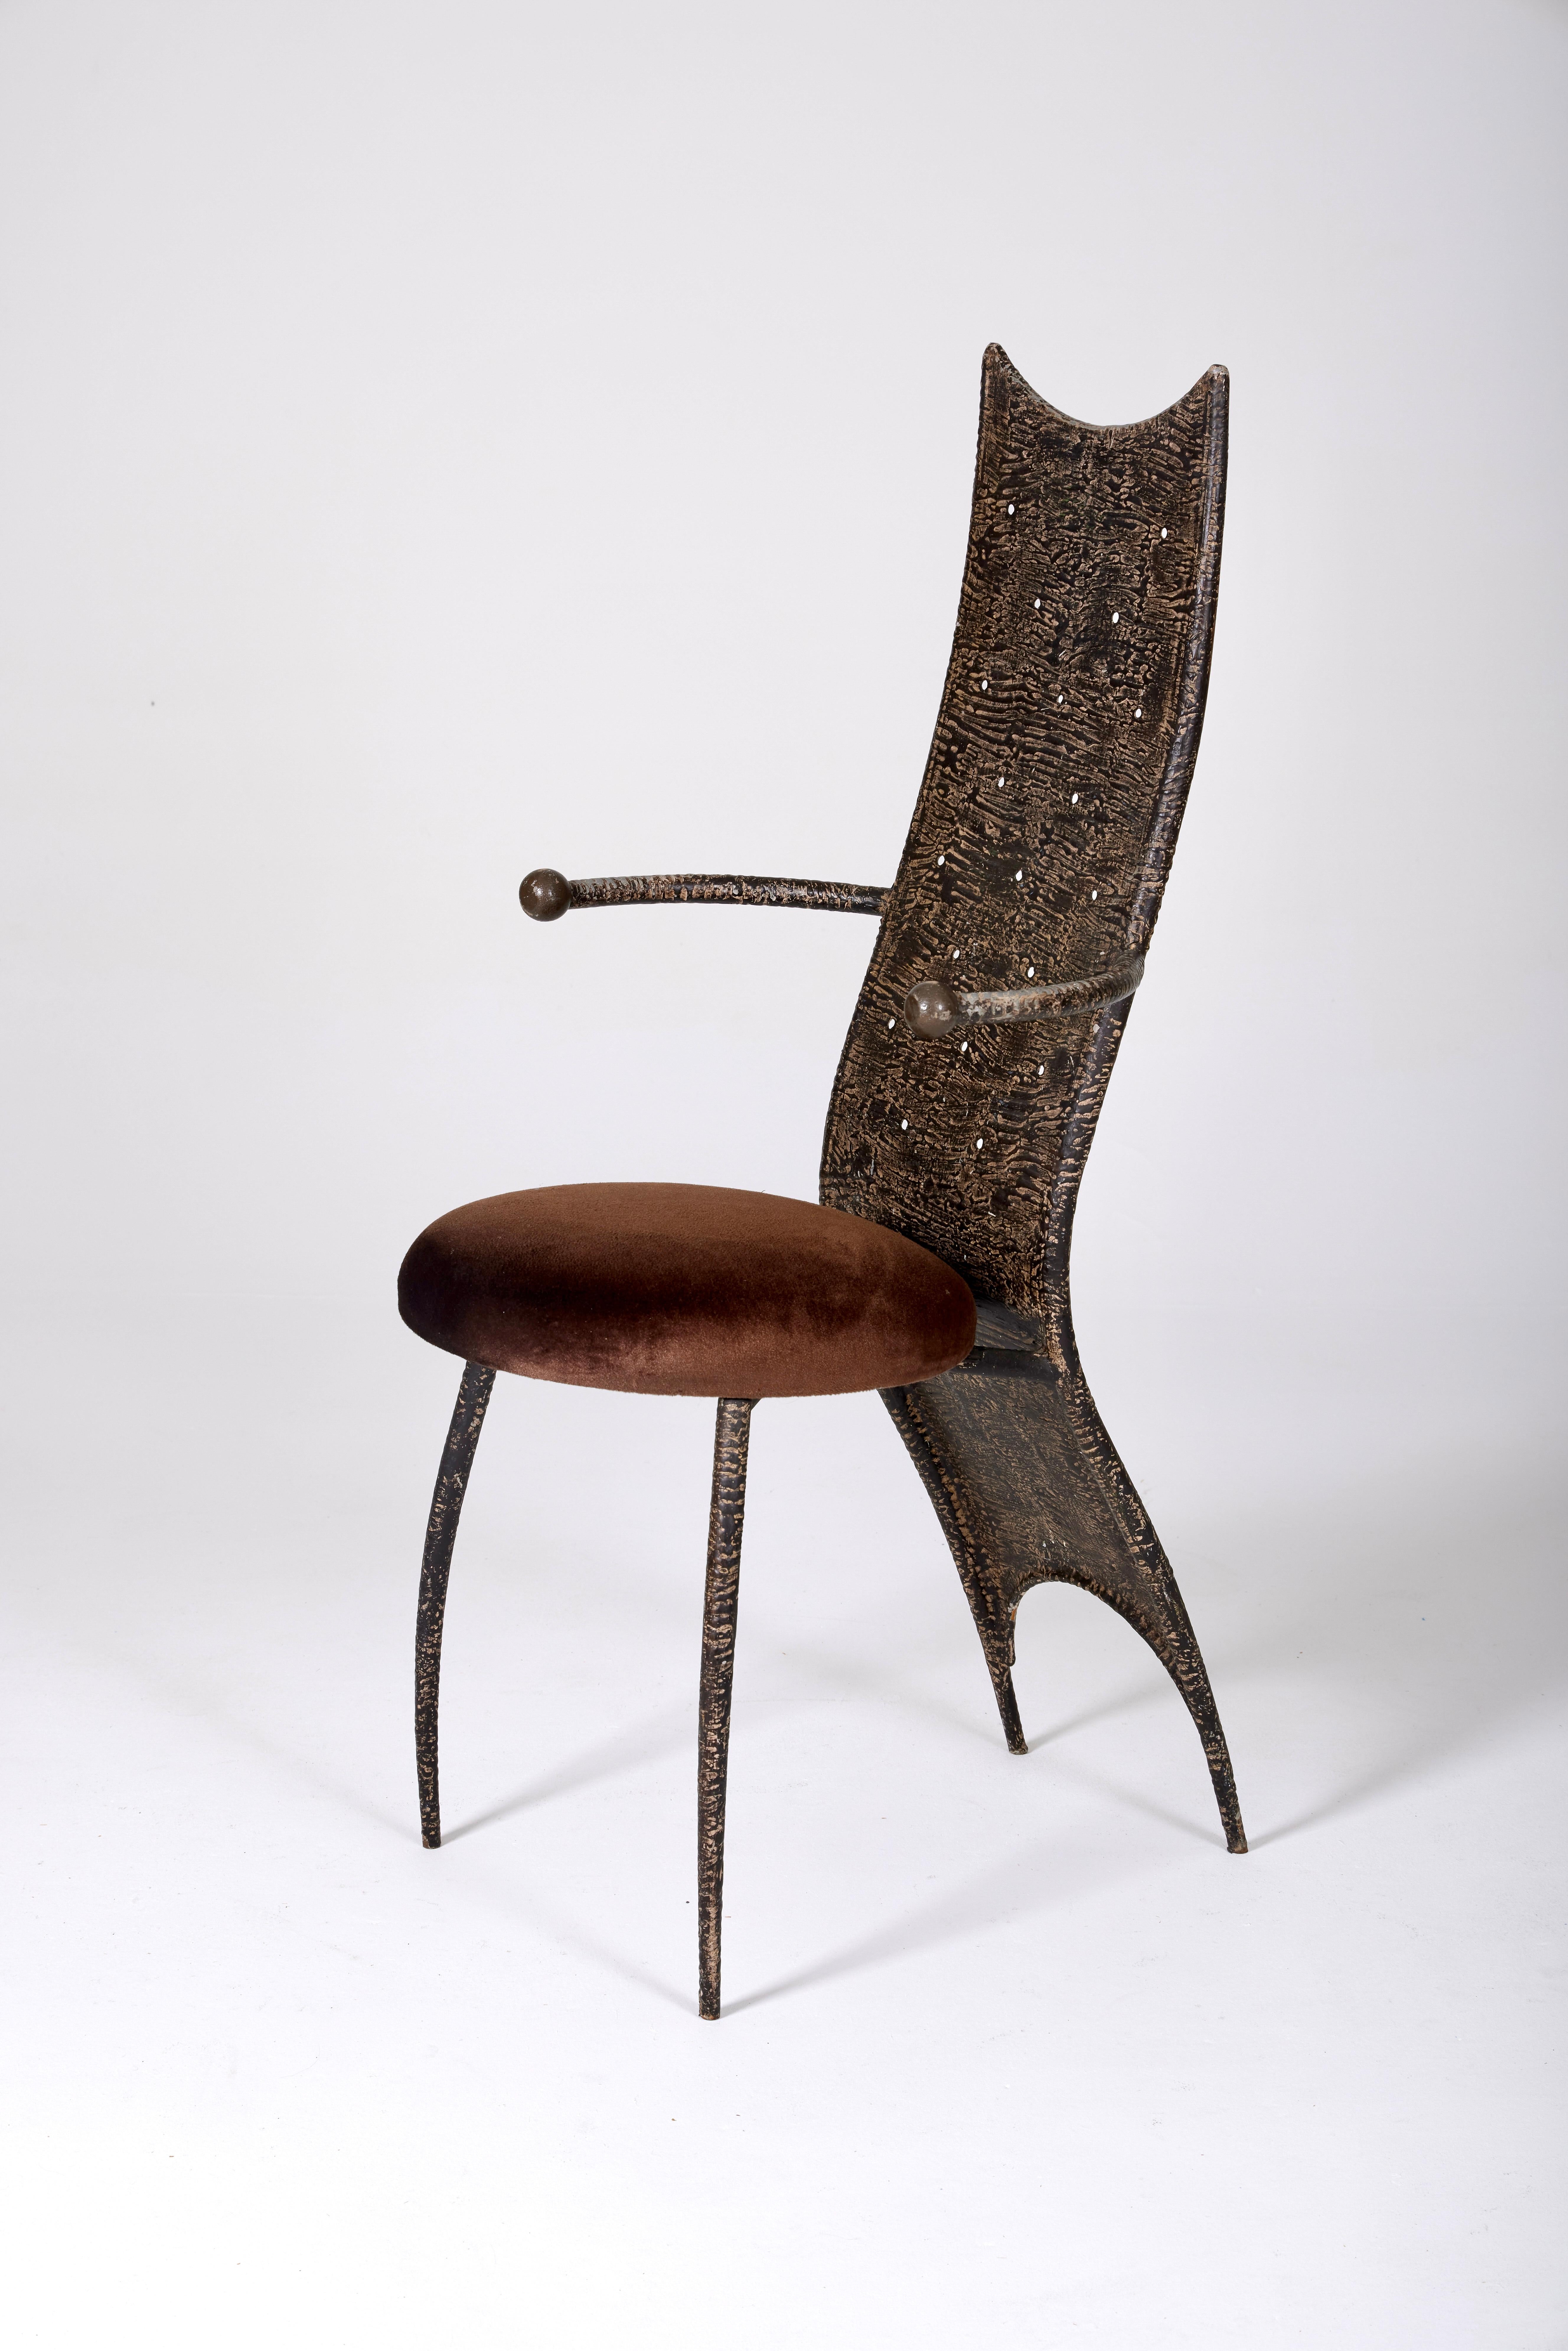 Pressed metal chair inspired by the En attendant les barbares gallery's collection, from the 1990s. The seat features a brown velvet cushion. This chair will perfectly complement the furniture of designers Elisabeth Garouste and Mattia